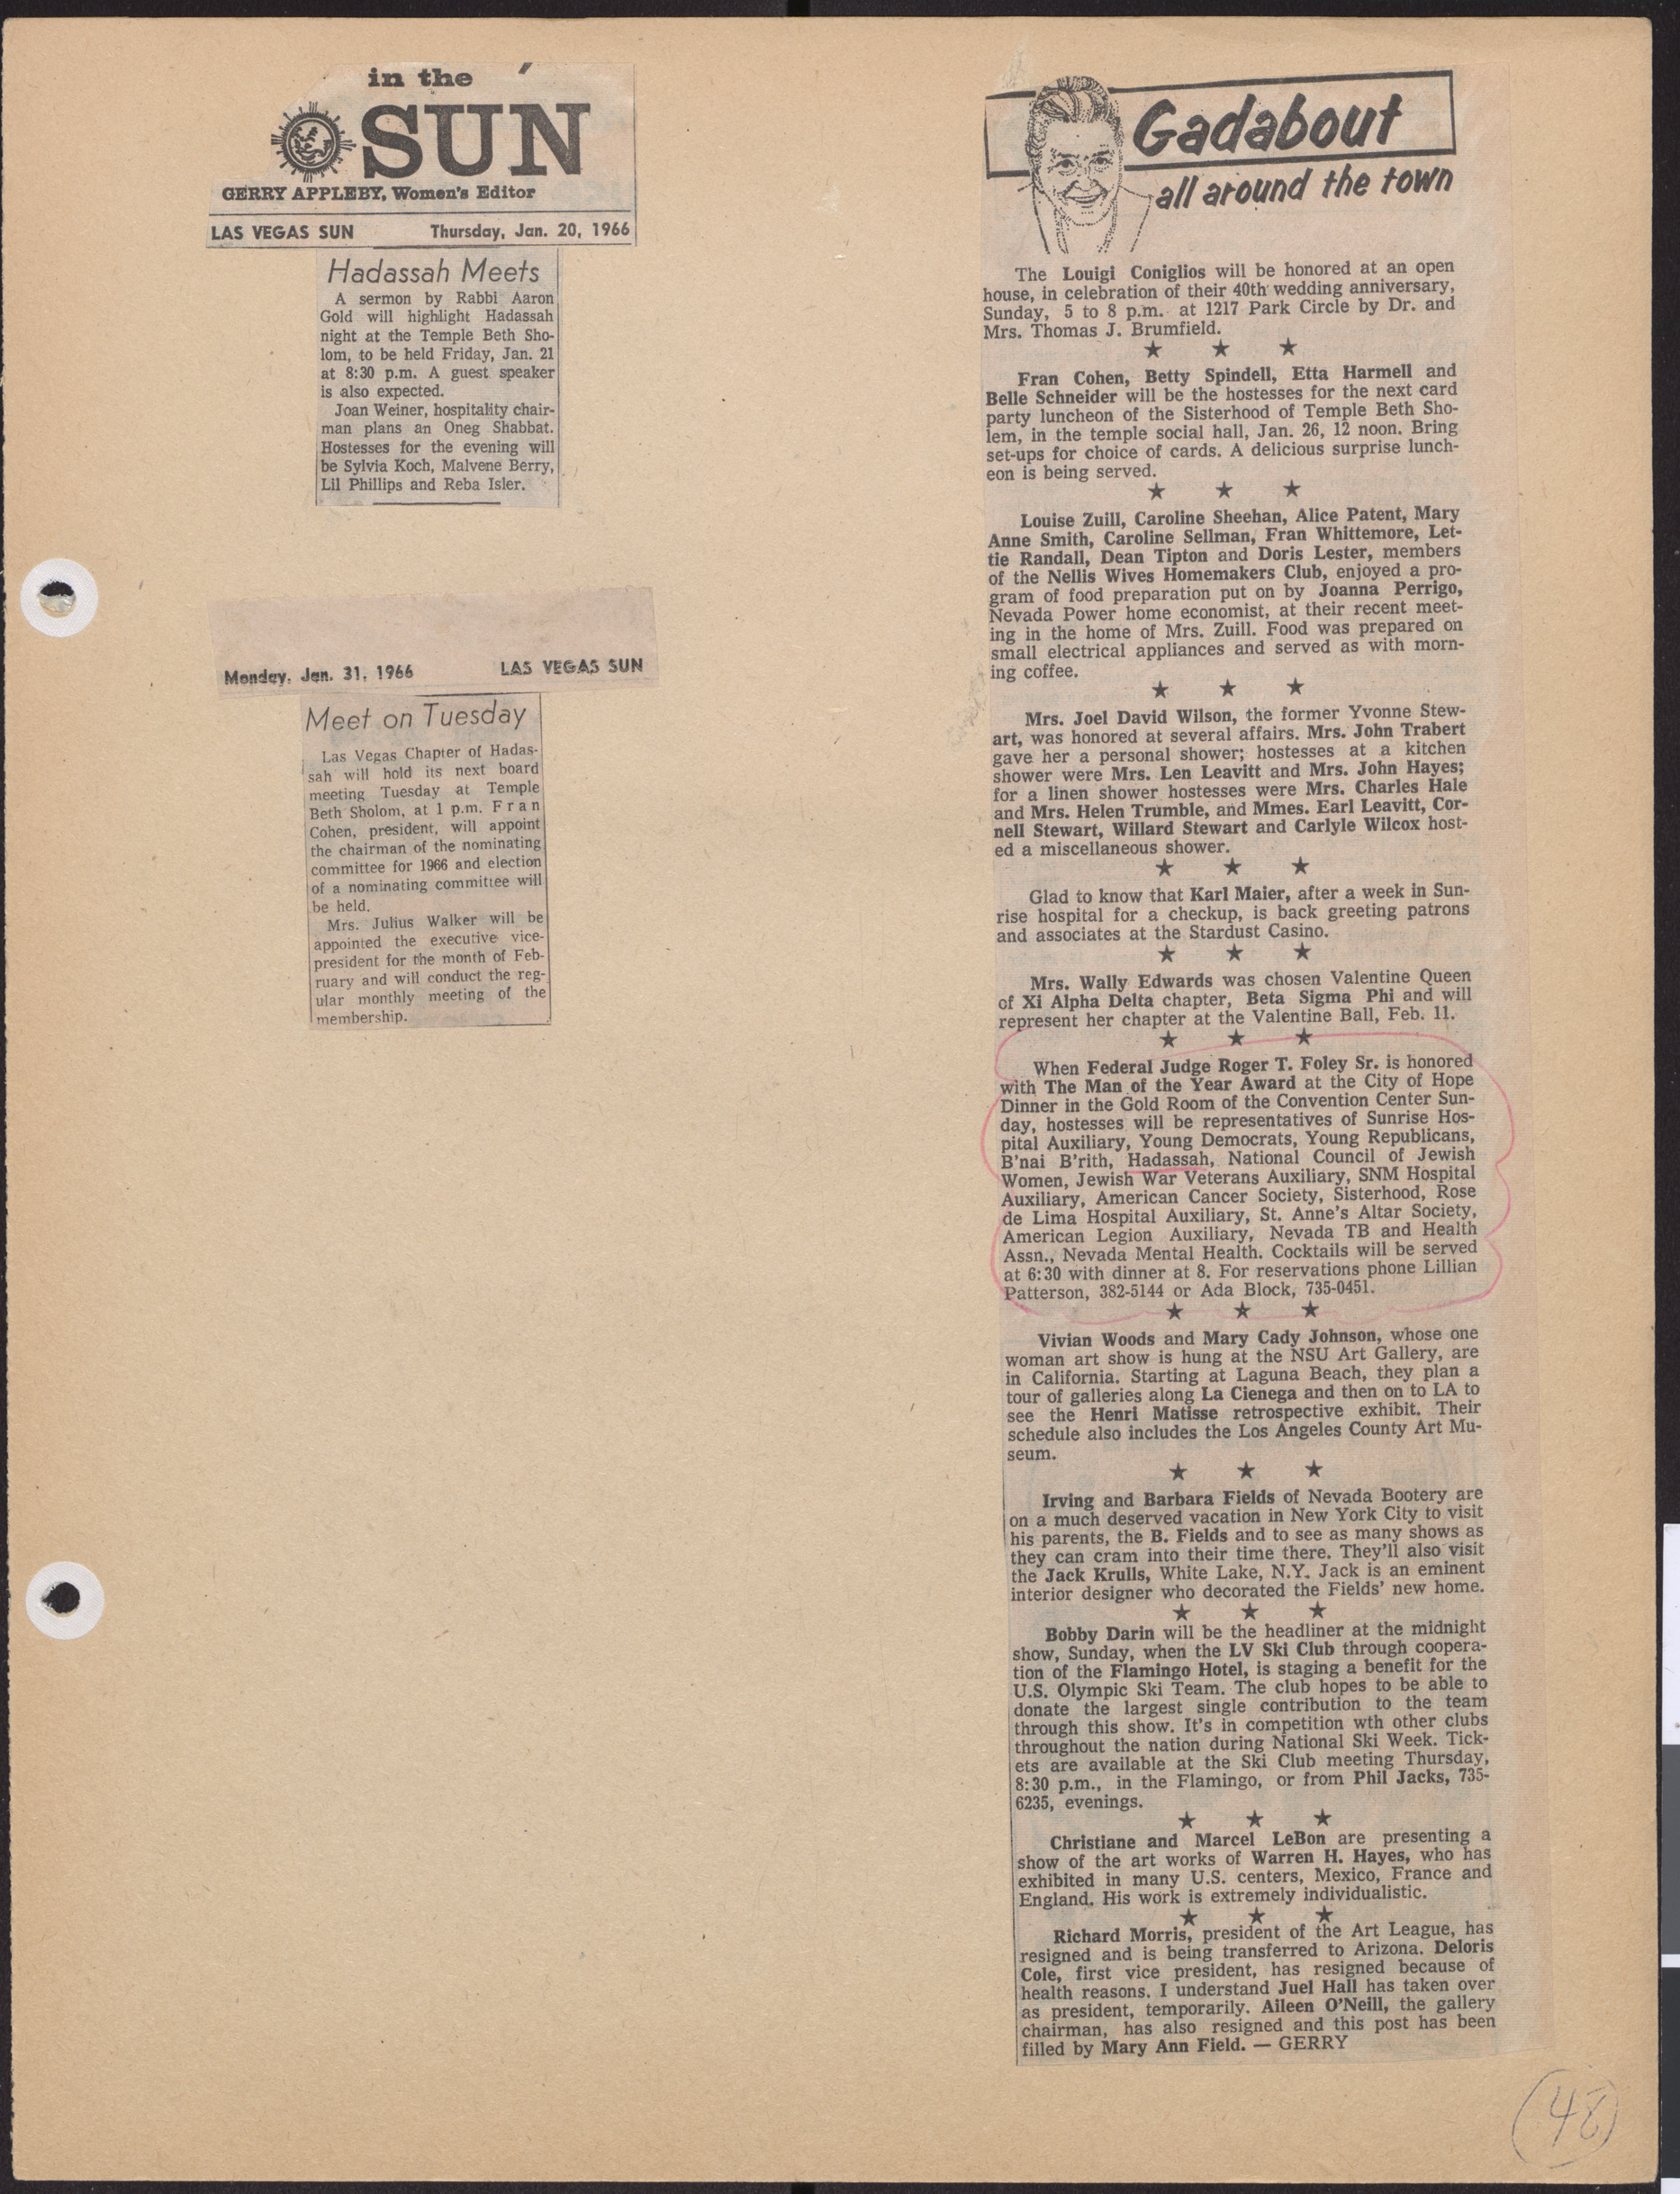 Newspaper clippings about Hadassah meetings and events, January 1966